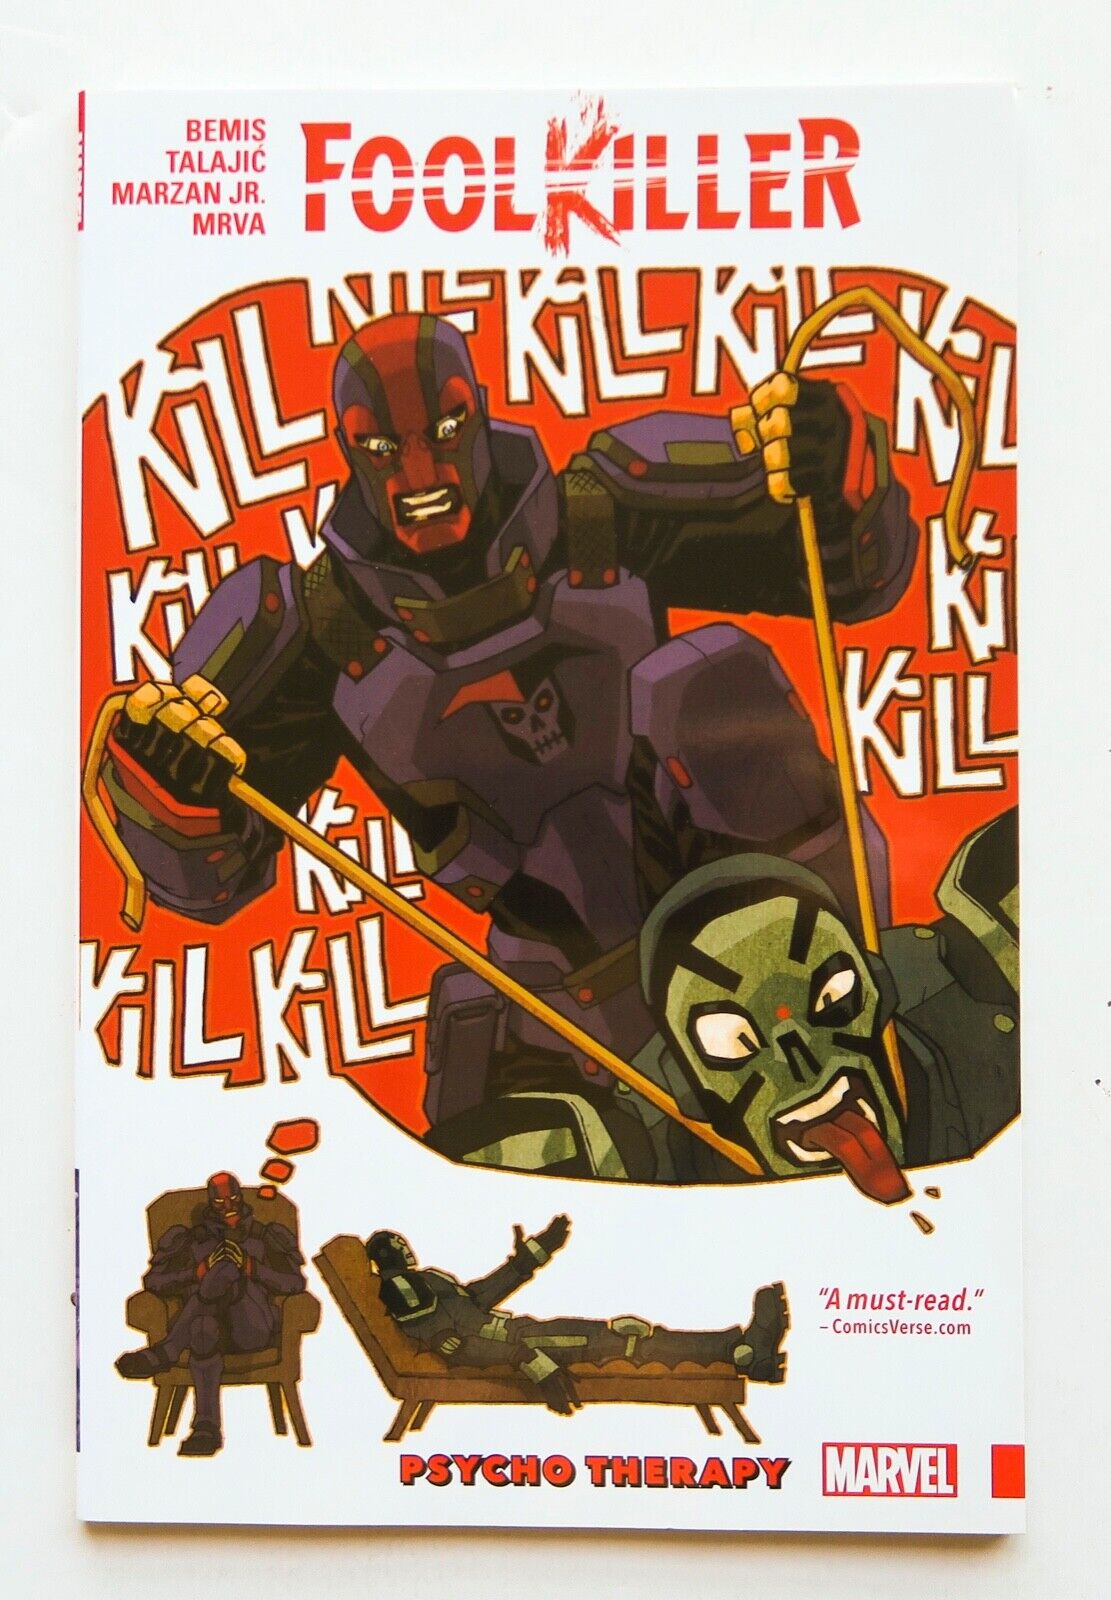 Foolkiller Psycho Therapy Marvel Graphic Novel Comic Book